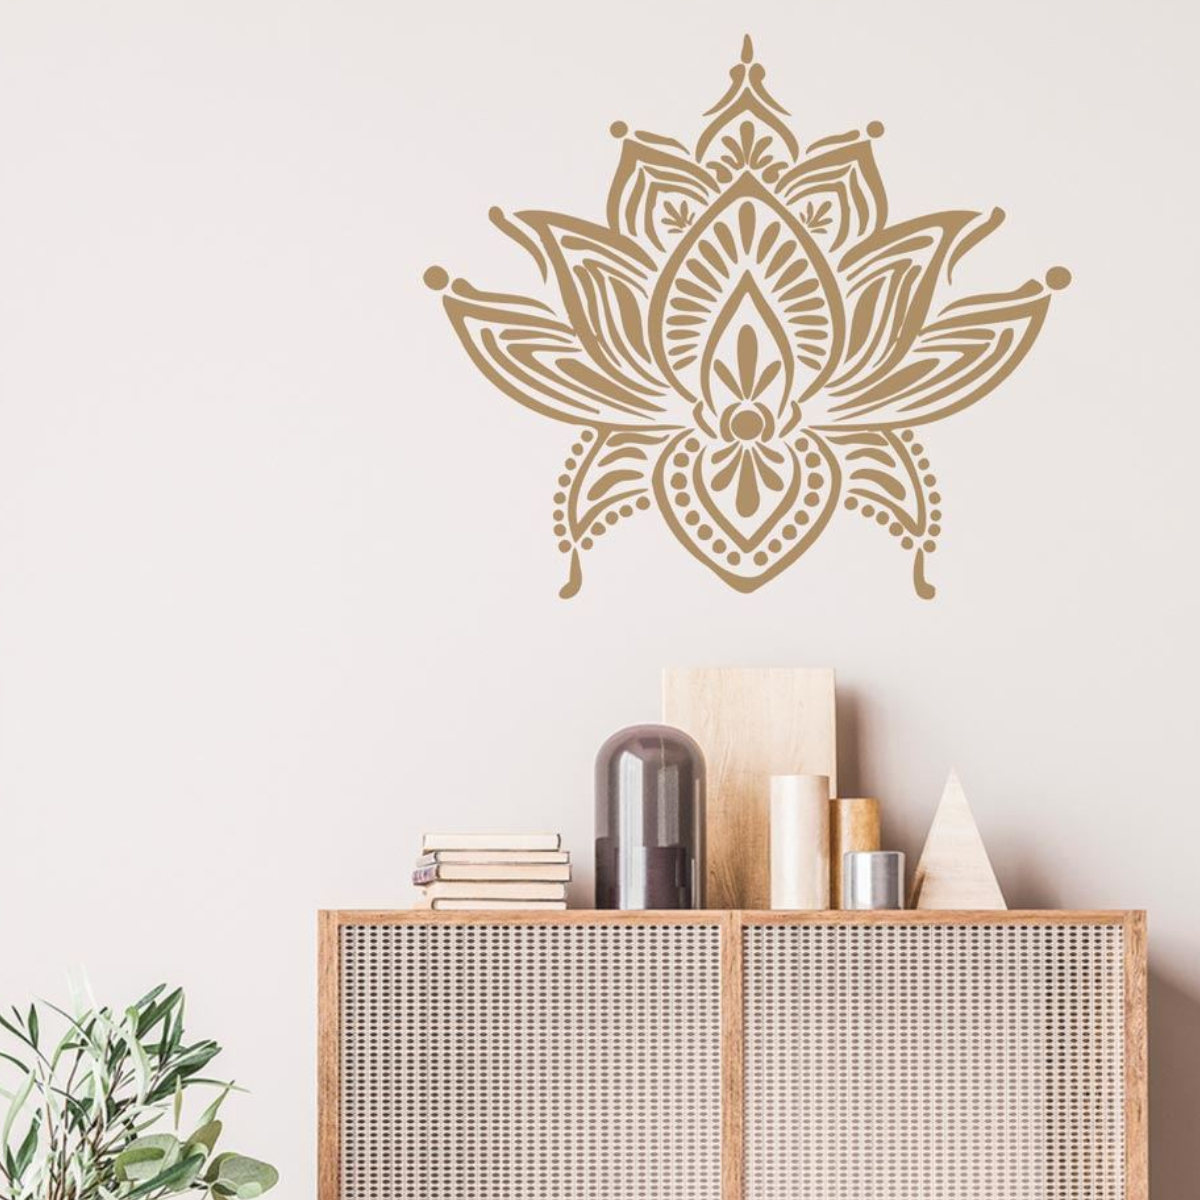 Lotus wall stickers